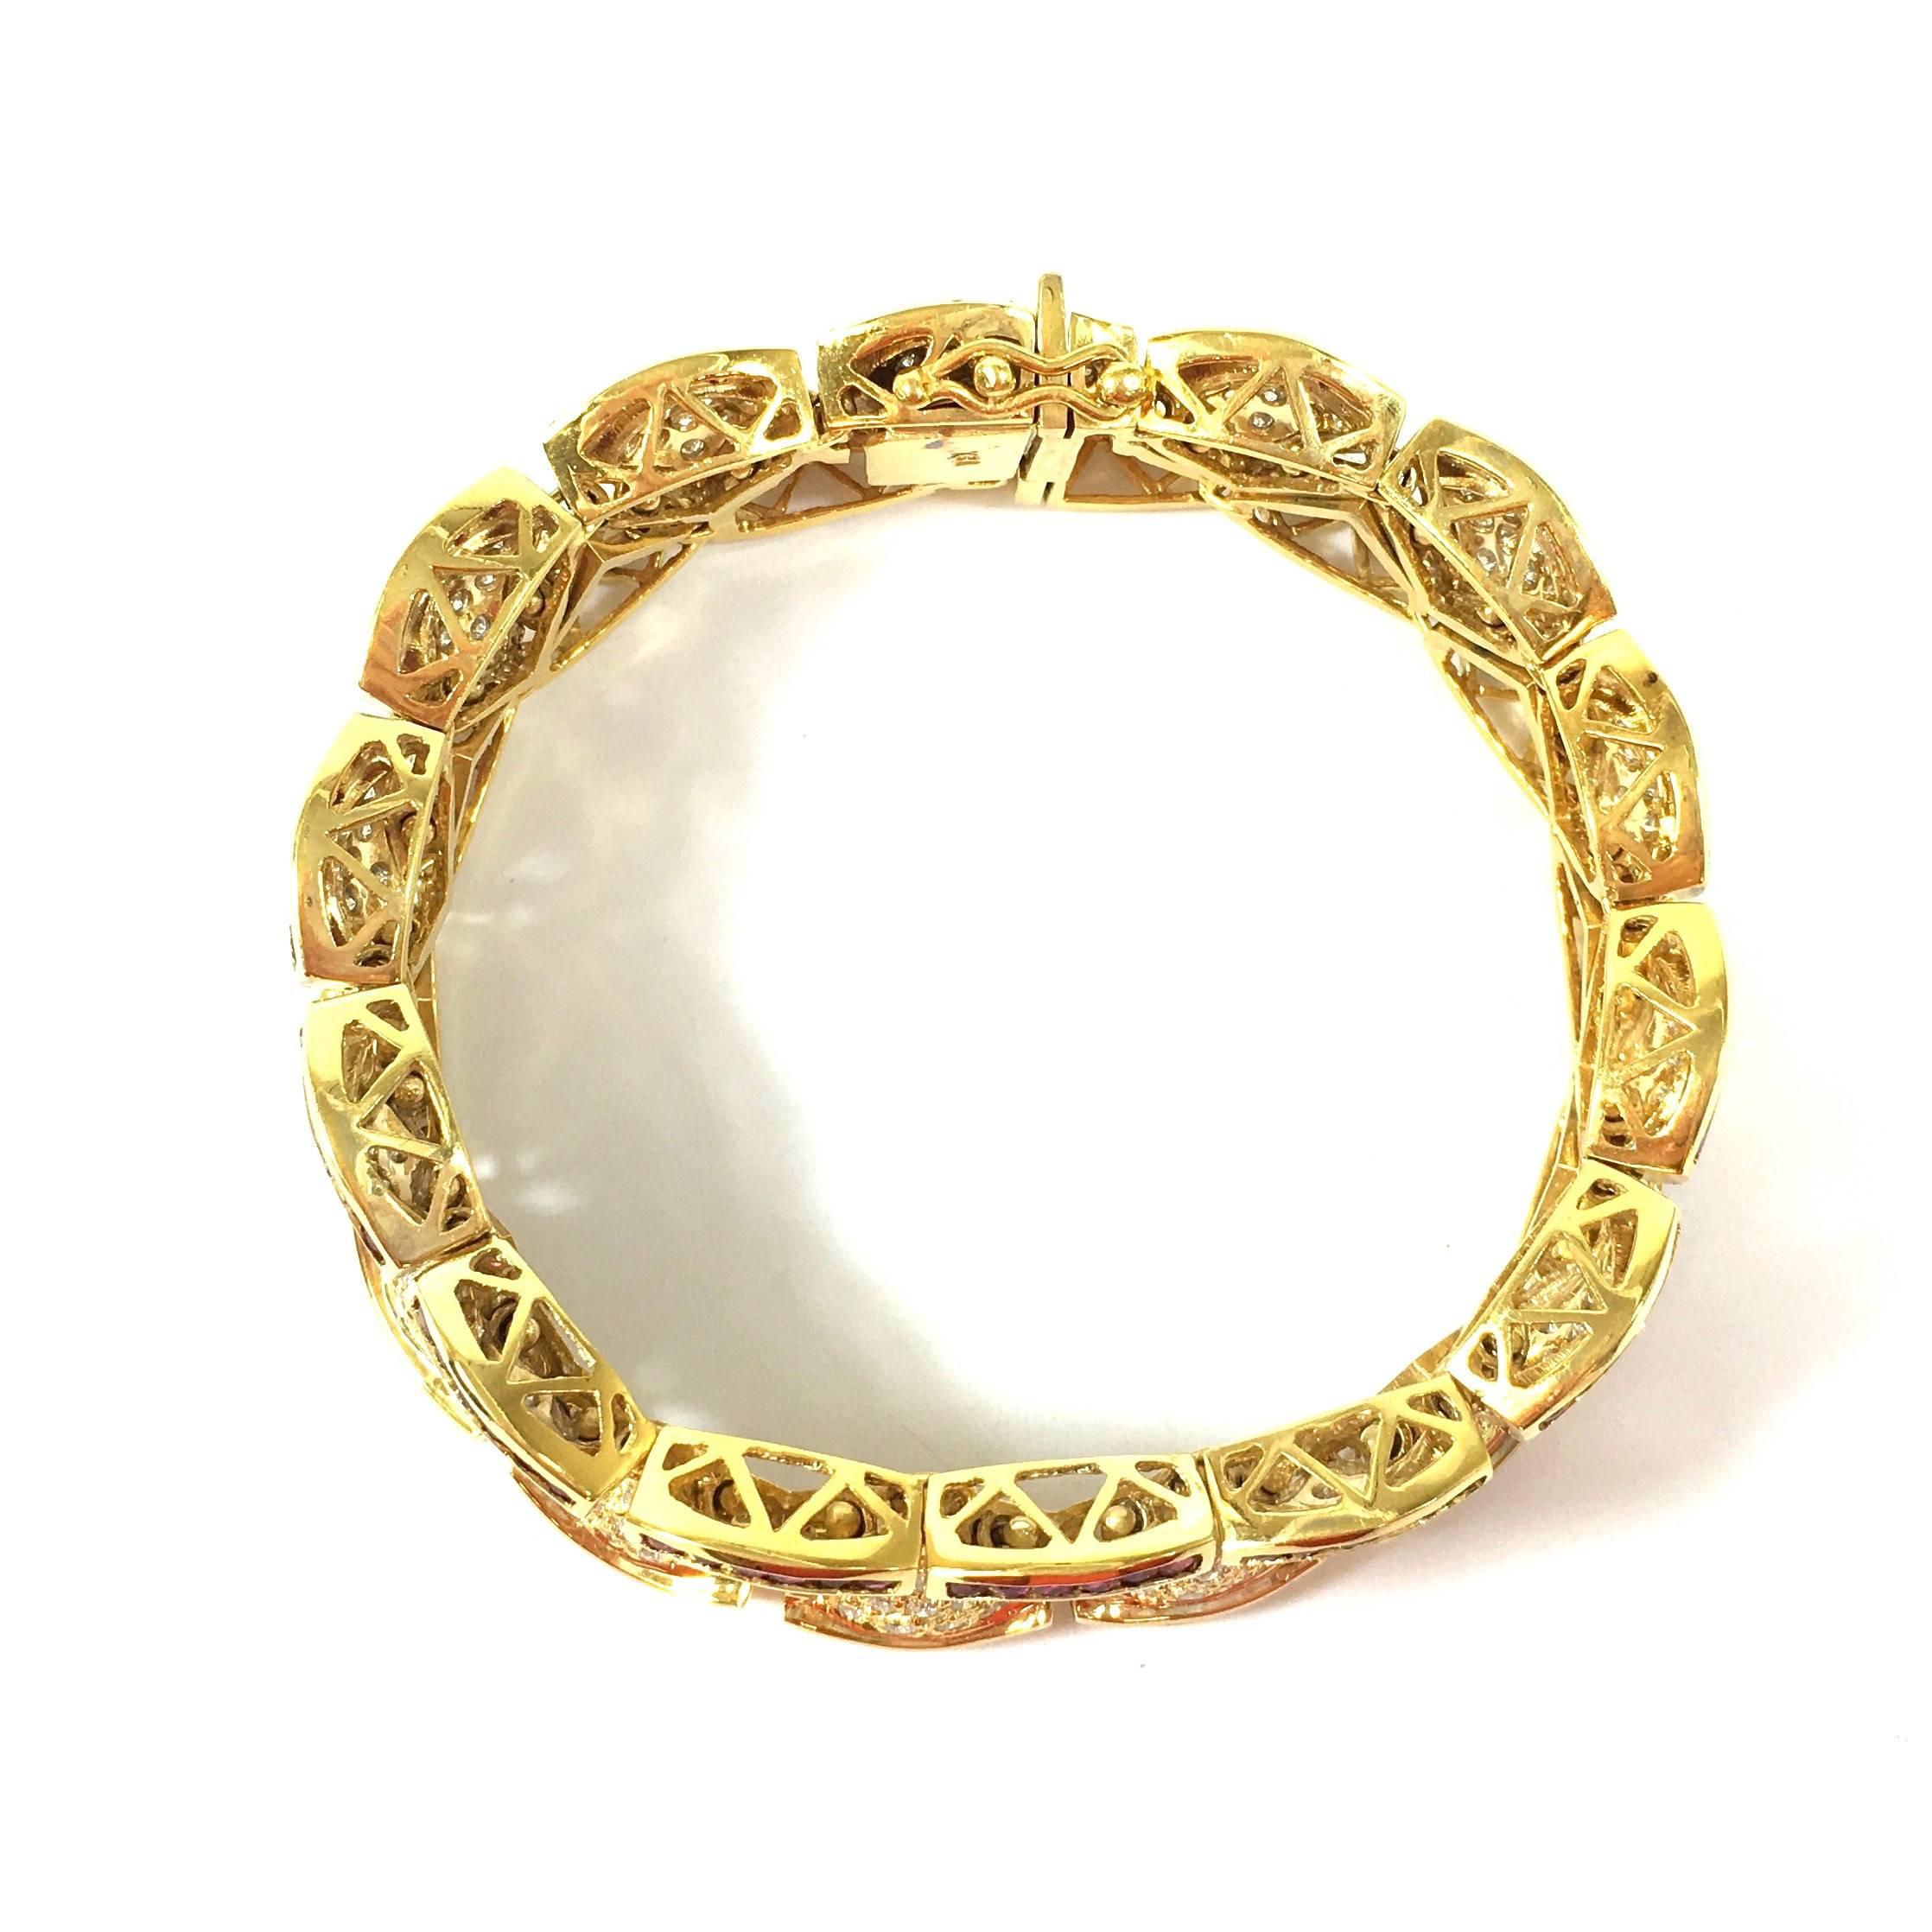 18K yellow gold flexible bracelet, featuring a design two rows of cascading scalloped gold links.
Approximate total diamond weight: 8.00ct  Clarity: VS1-VS2, Color: G-H
Approximate total ruby weight: 5.5ct
Measurements:
Length: 7.25